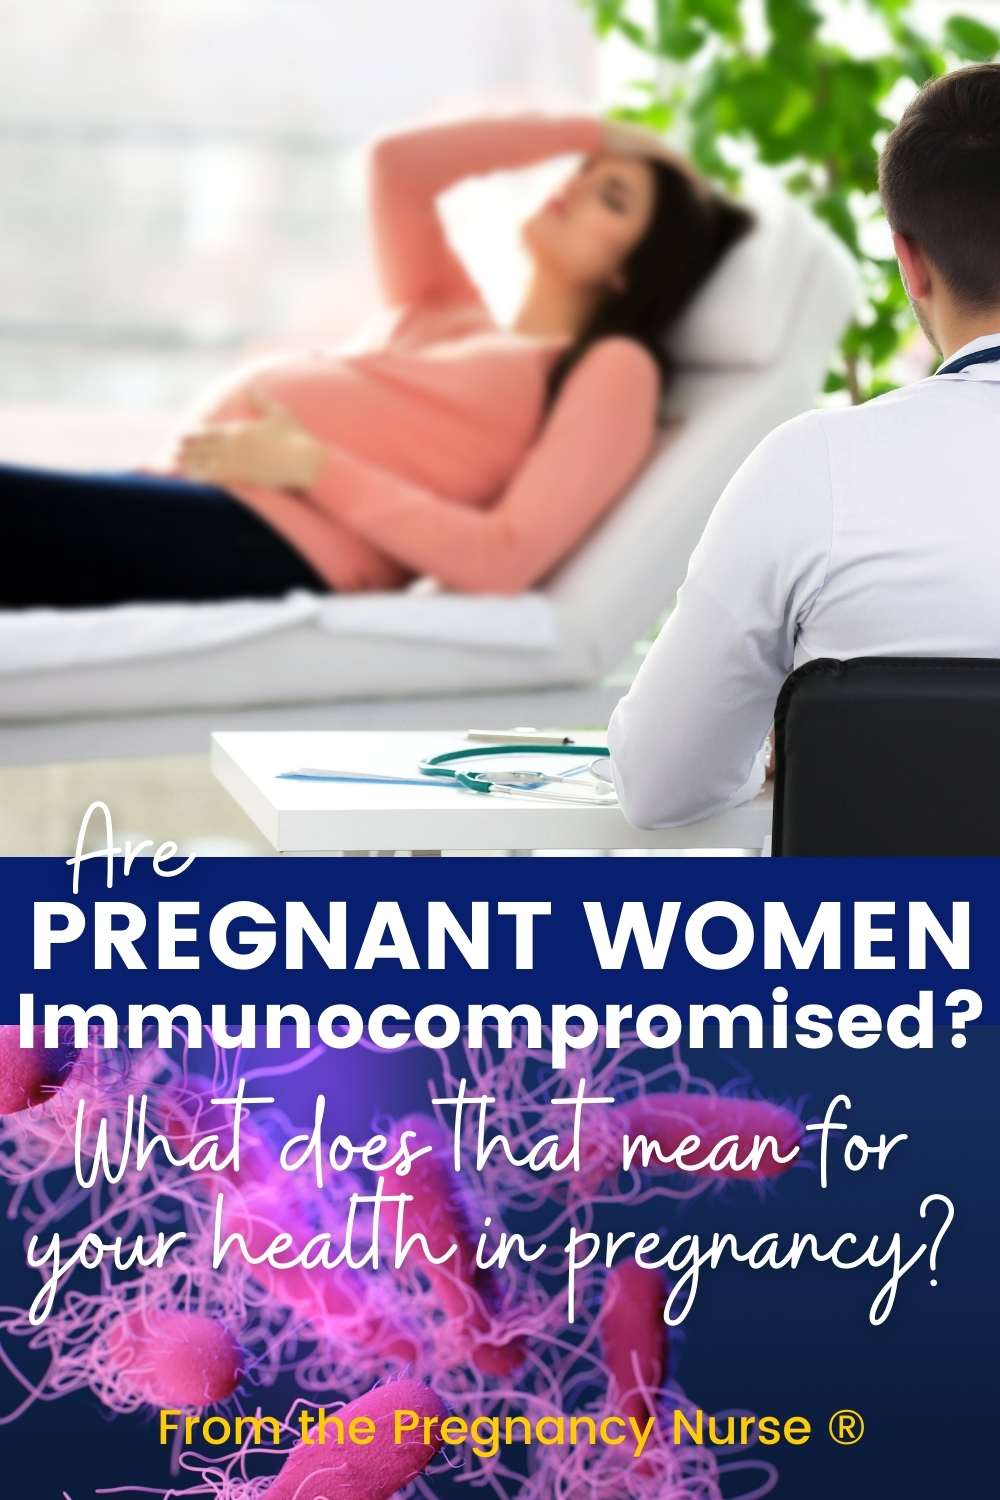 Your immune system gets complicated when you are pregnant. Similar to an organ transplant patient your body is trying to figure out how to both grow a baby and not attack it as a foreign body. Yes, your relationship status with your immune system is complicated.